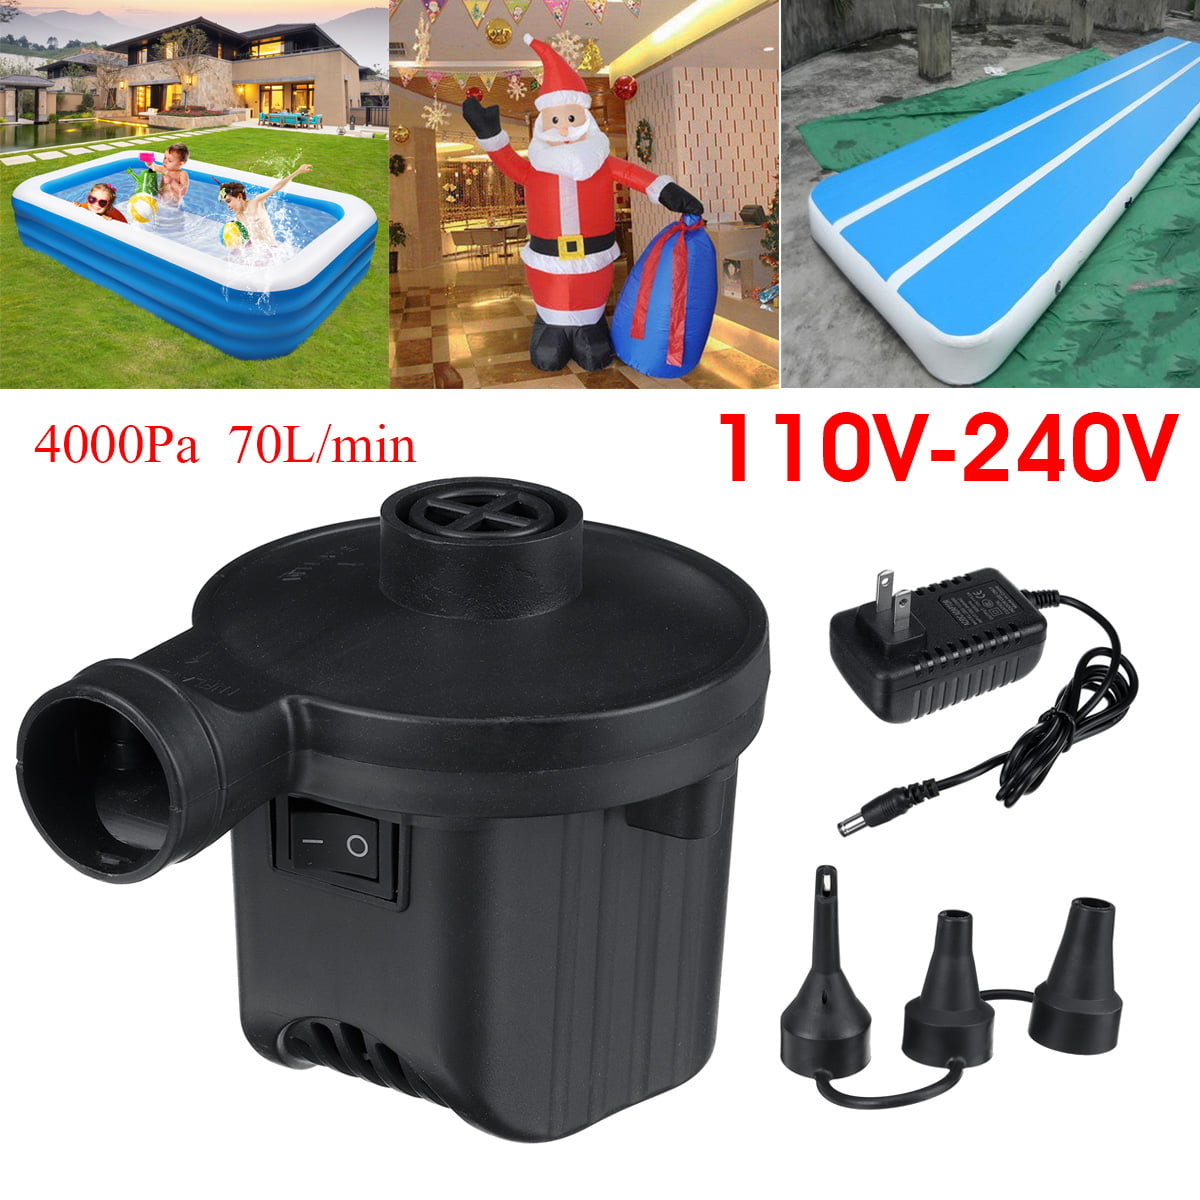 Portable Paddling pools Pump Inflatable Paddling Usb Charging Electric Outdoor Ultra-Light Pump for Camping Sports hinffinity Electric Air Pump